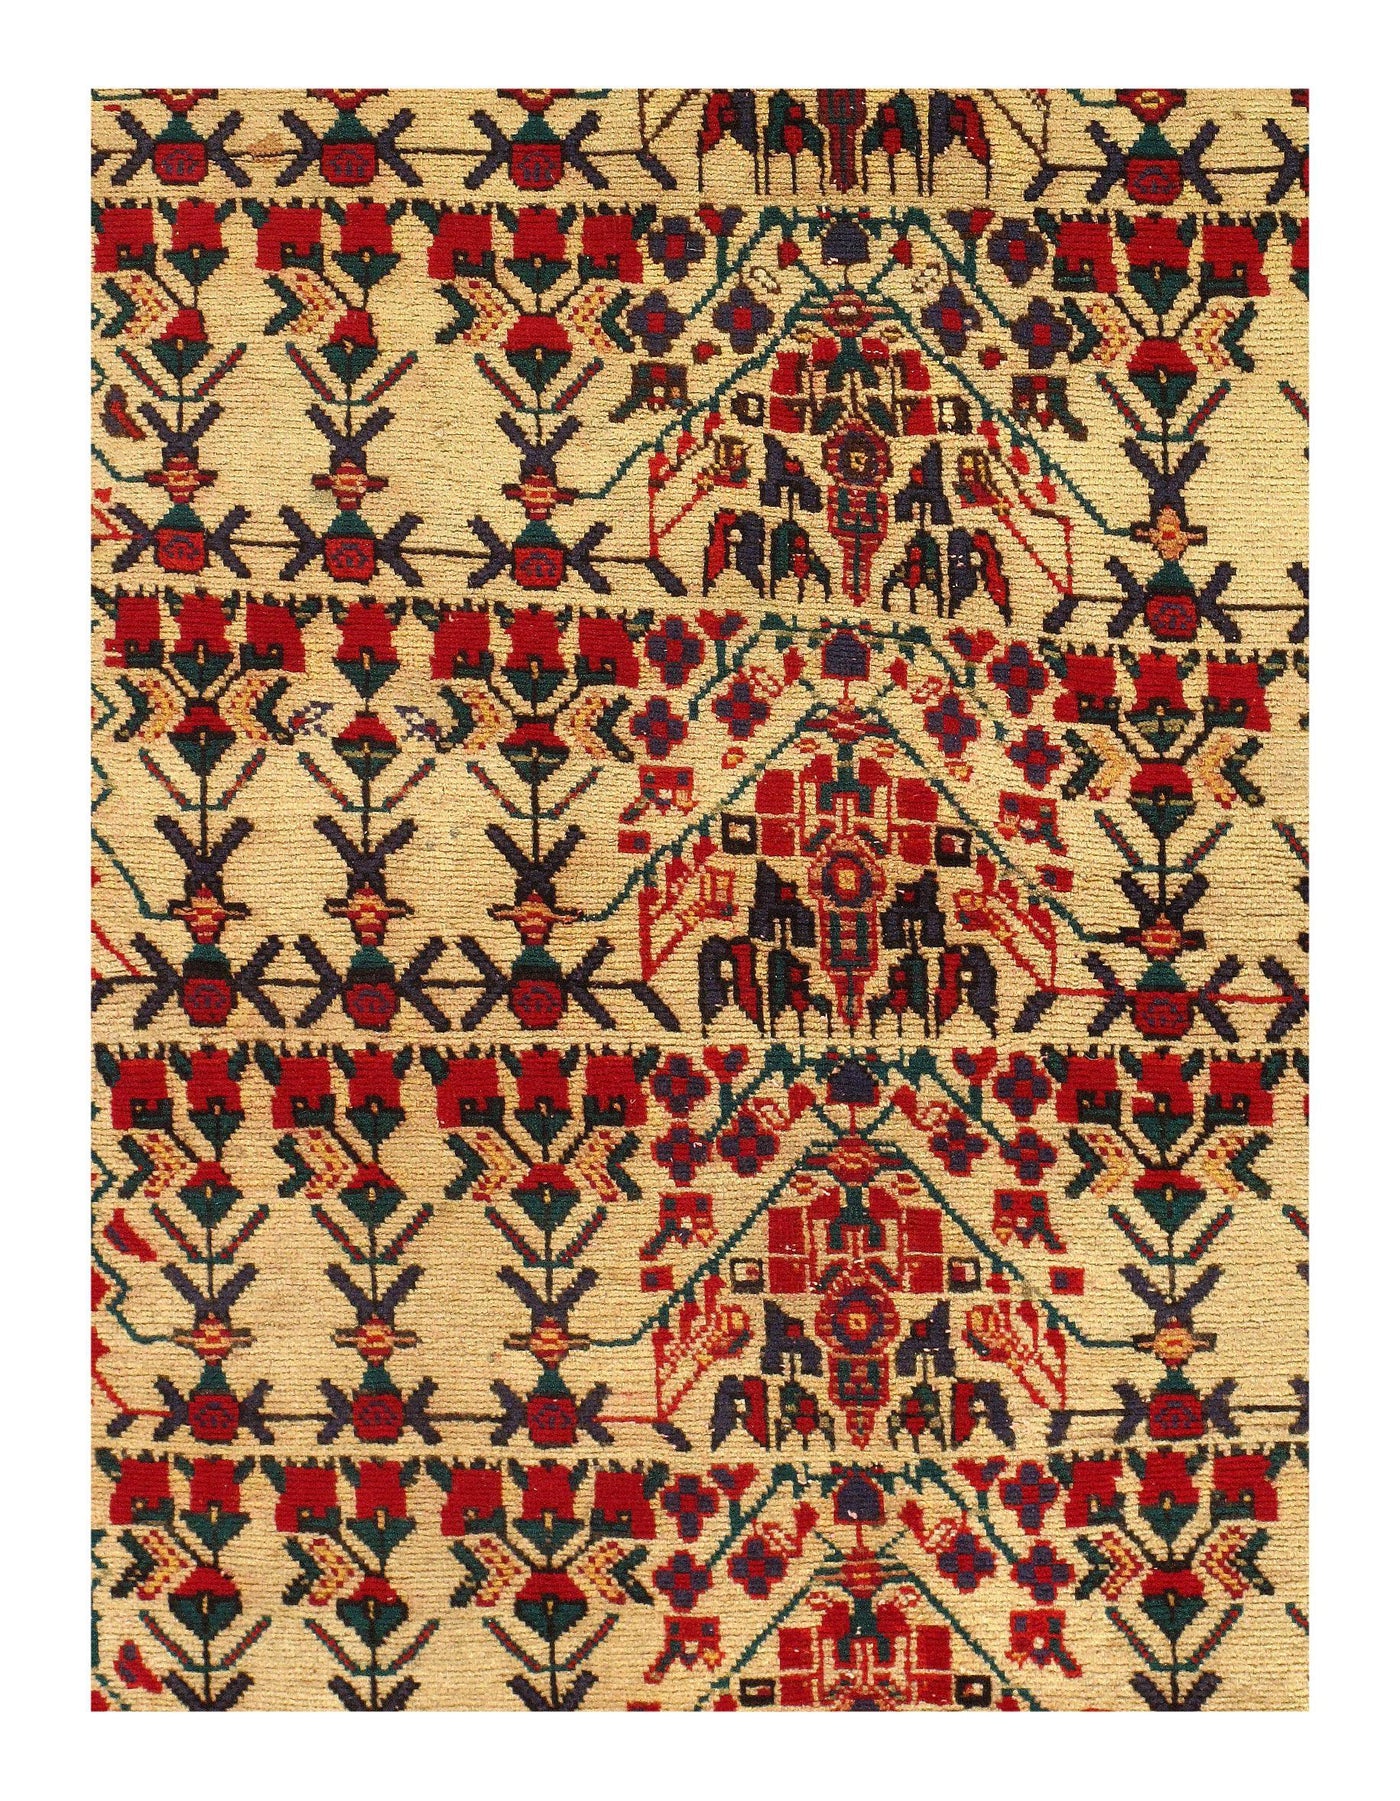 Canvello Persian Antique Afshar Ivory Runner Rug - 3'4'' X 9'9''